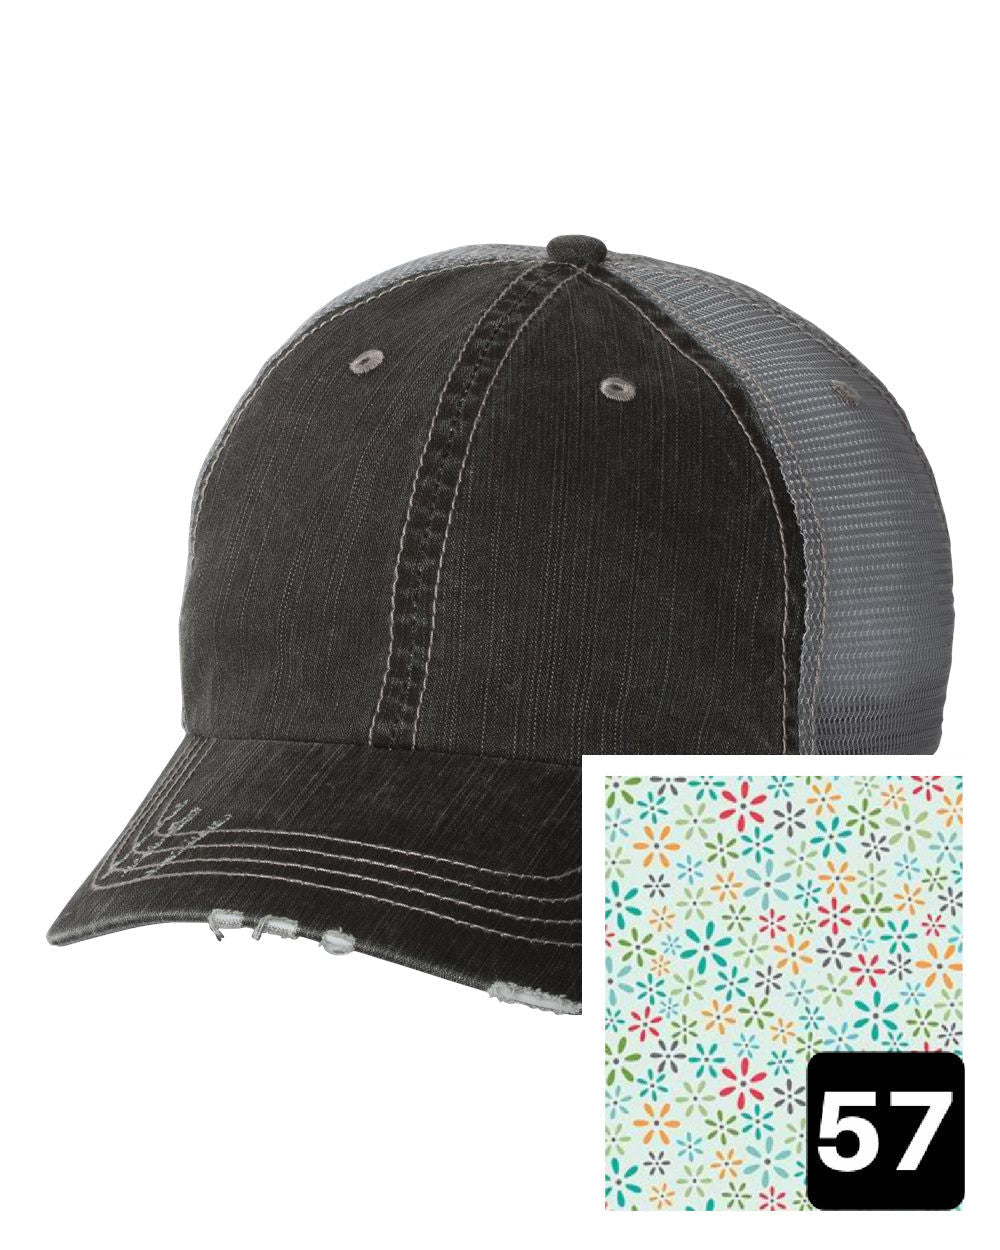 gray distressed trucker hat with white daisy on yellow fabric state of Wyoming